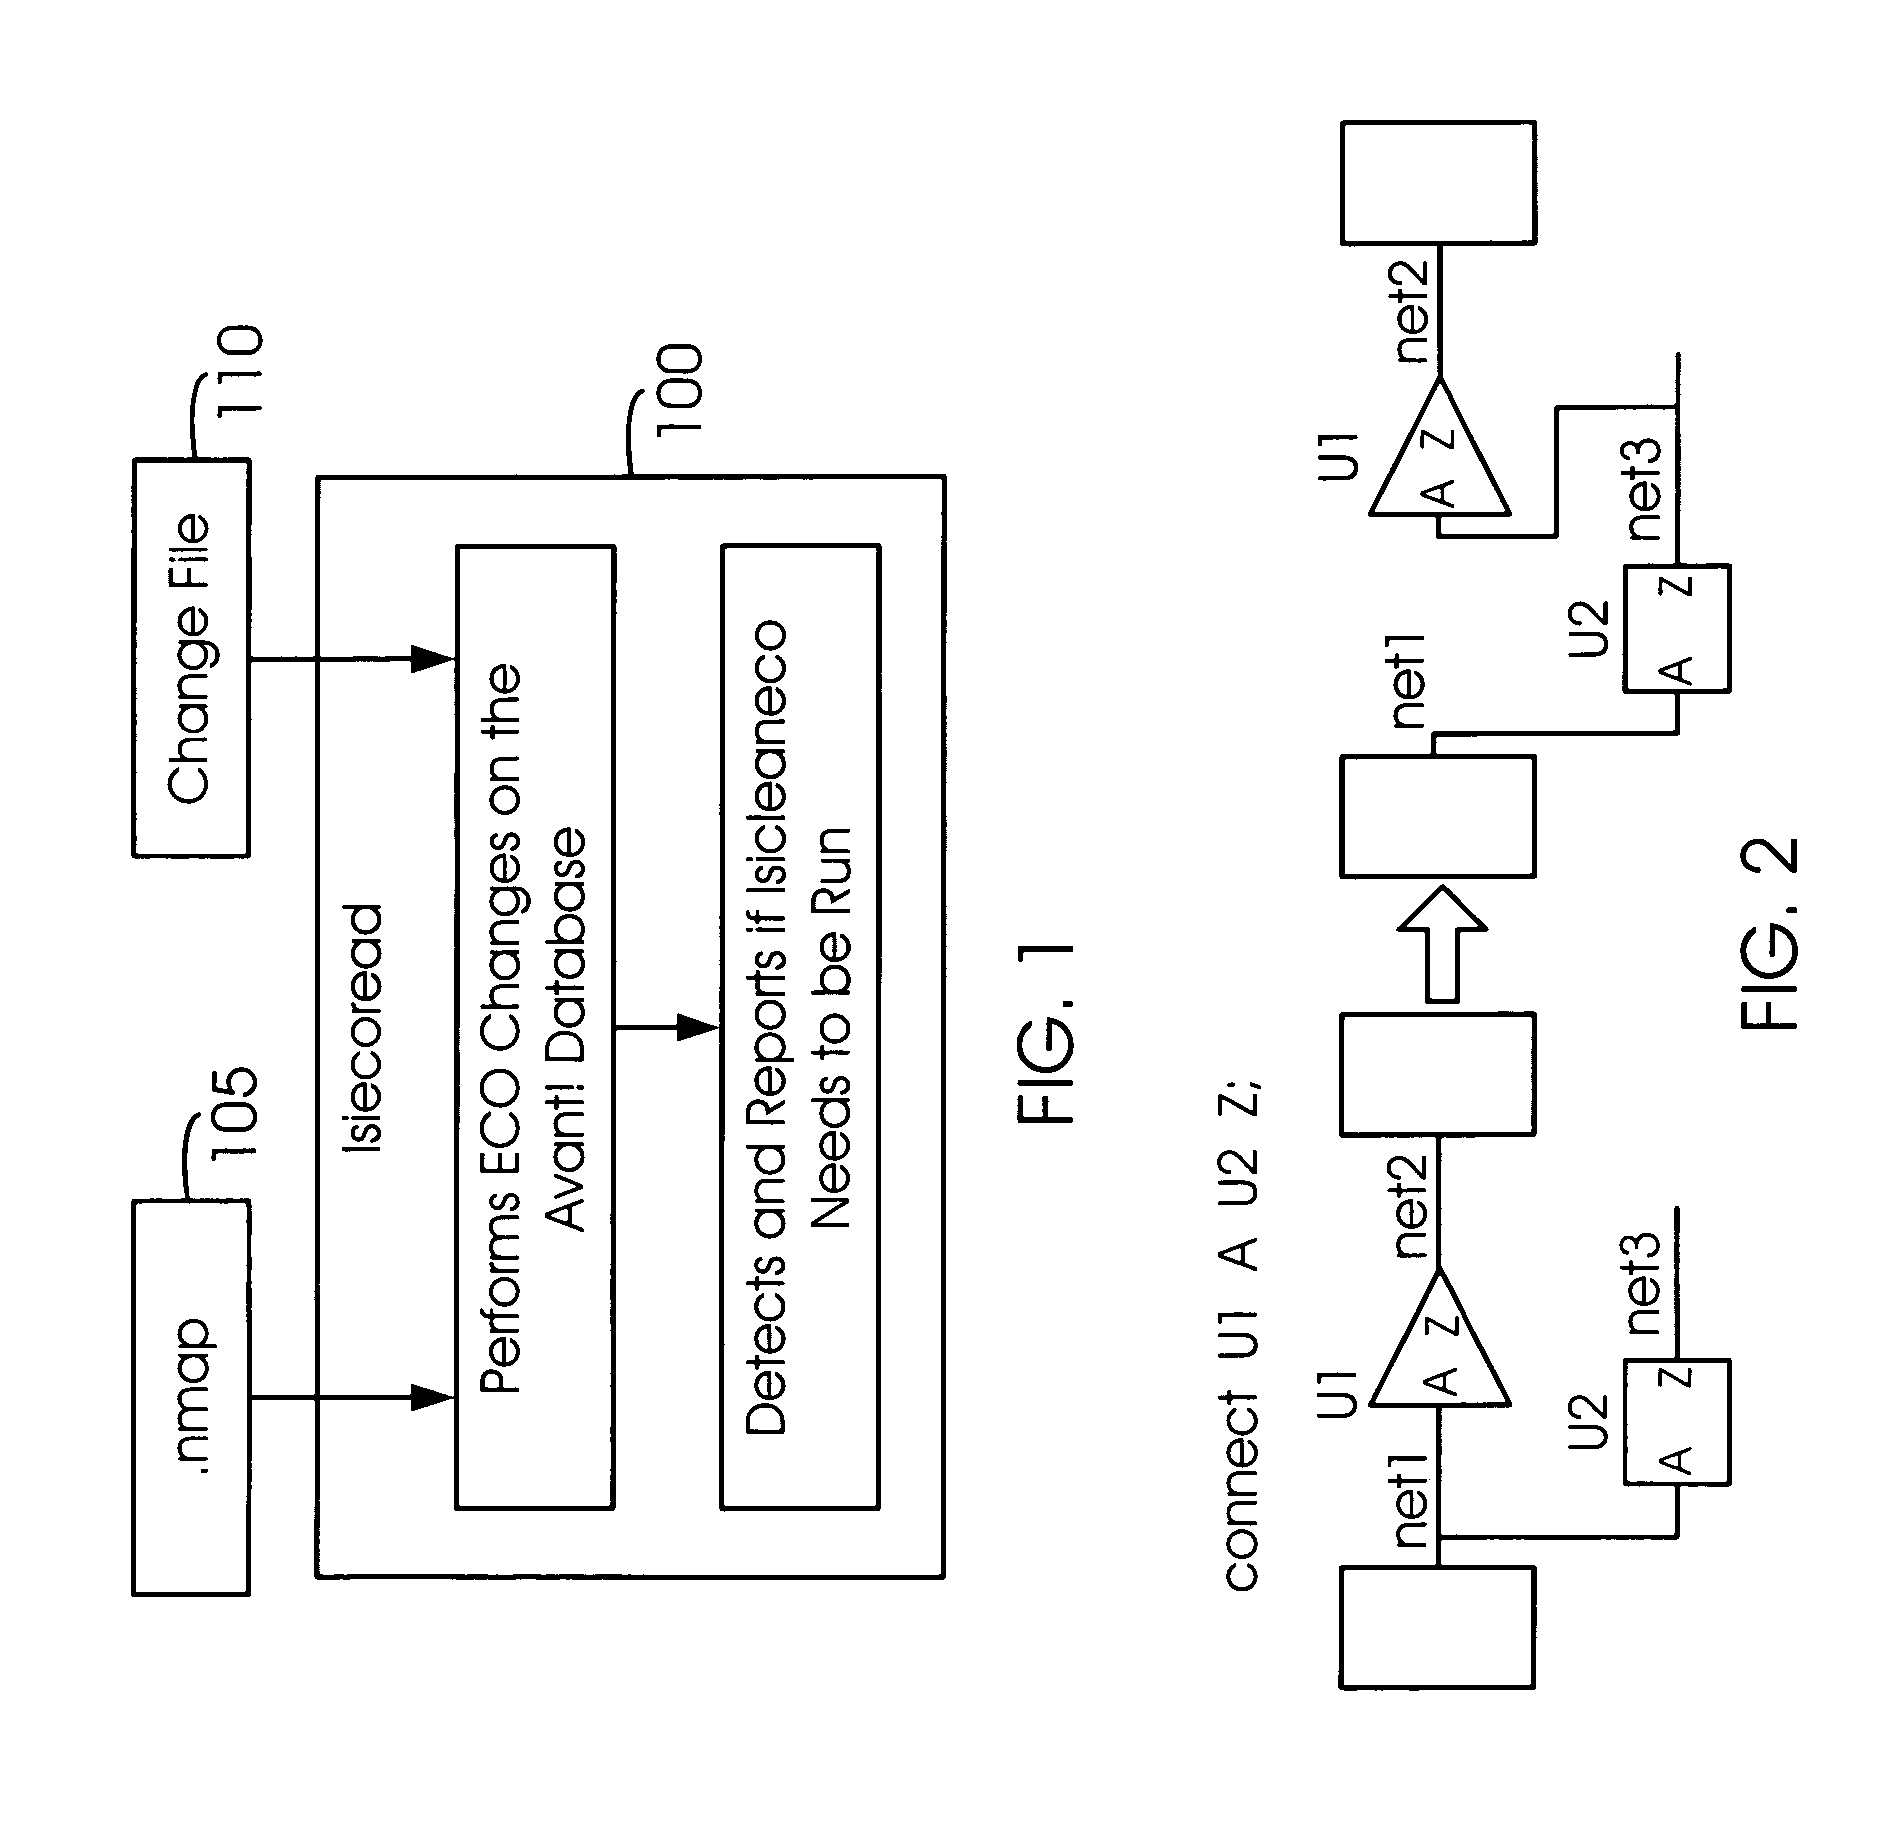 Method and apparatus for implementing engineering change orders